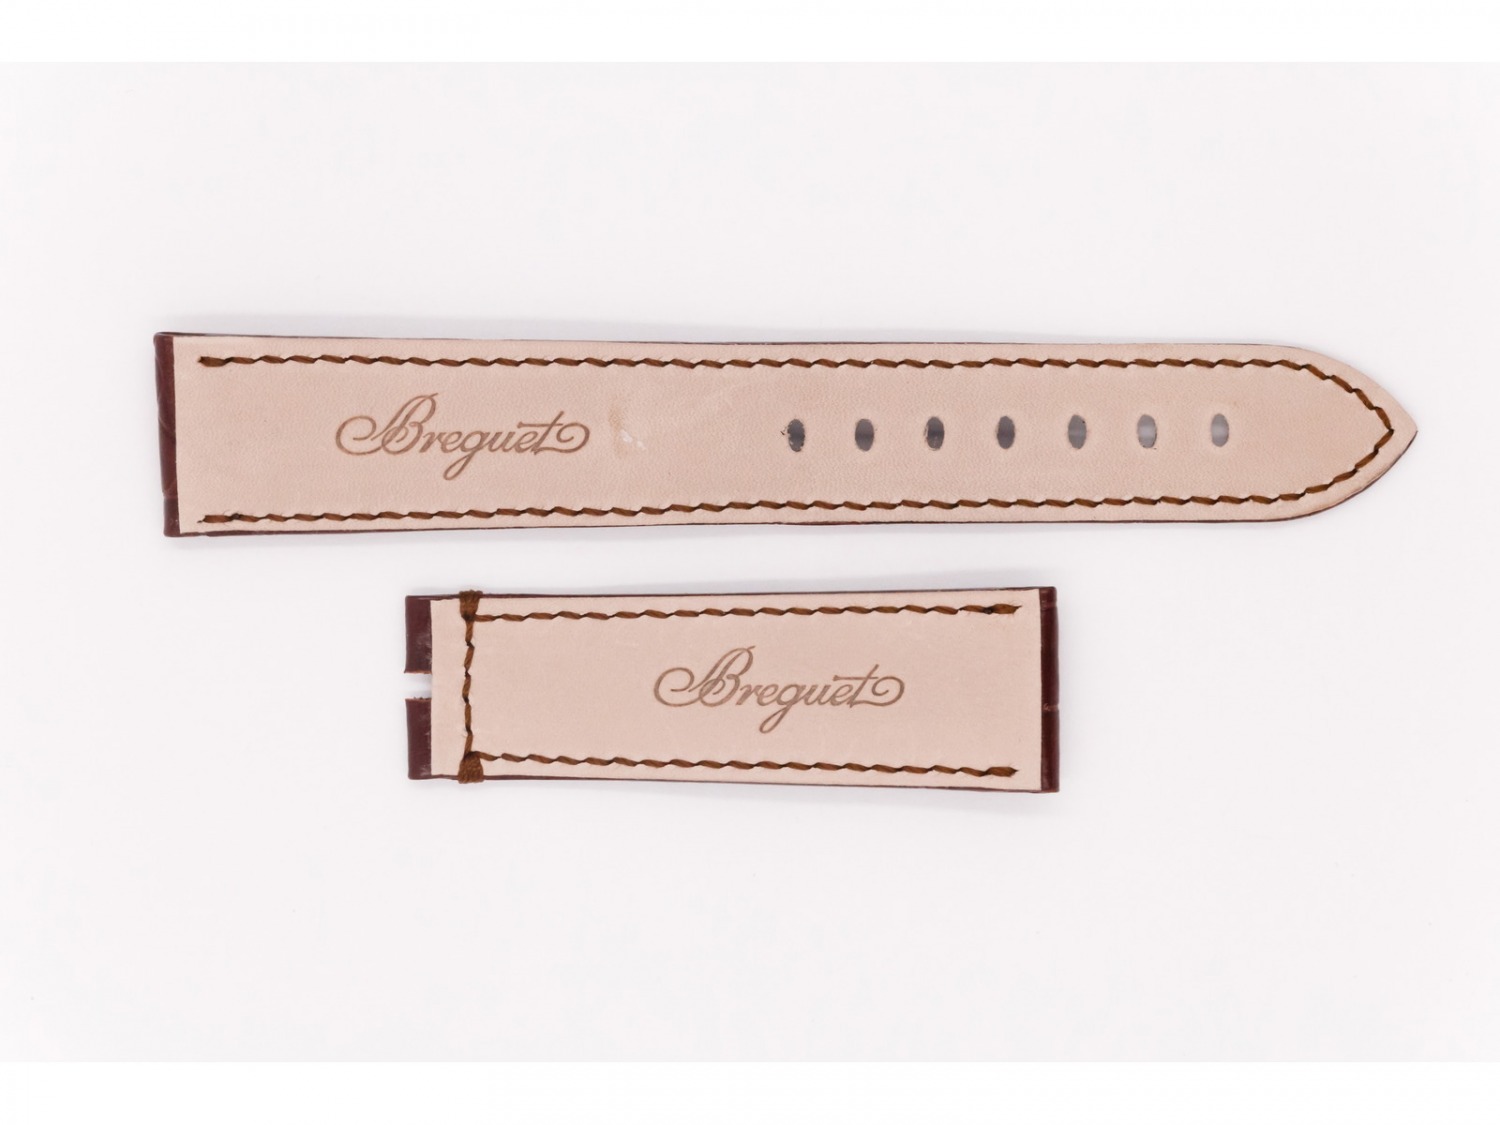 Leather Breguet Strap, brown